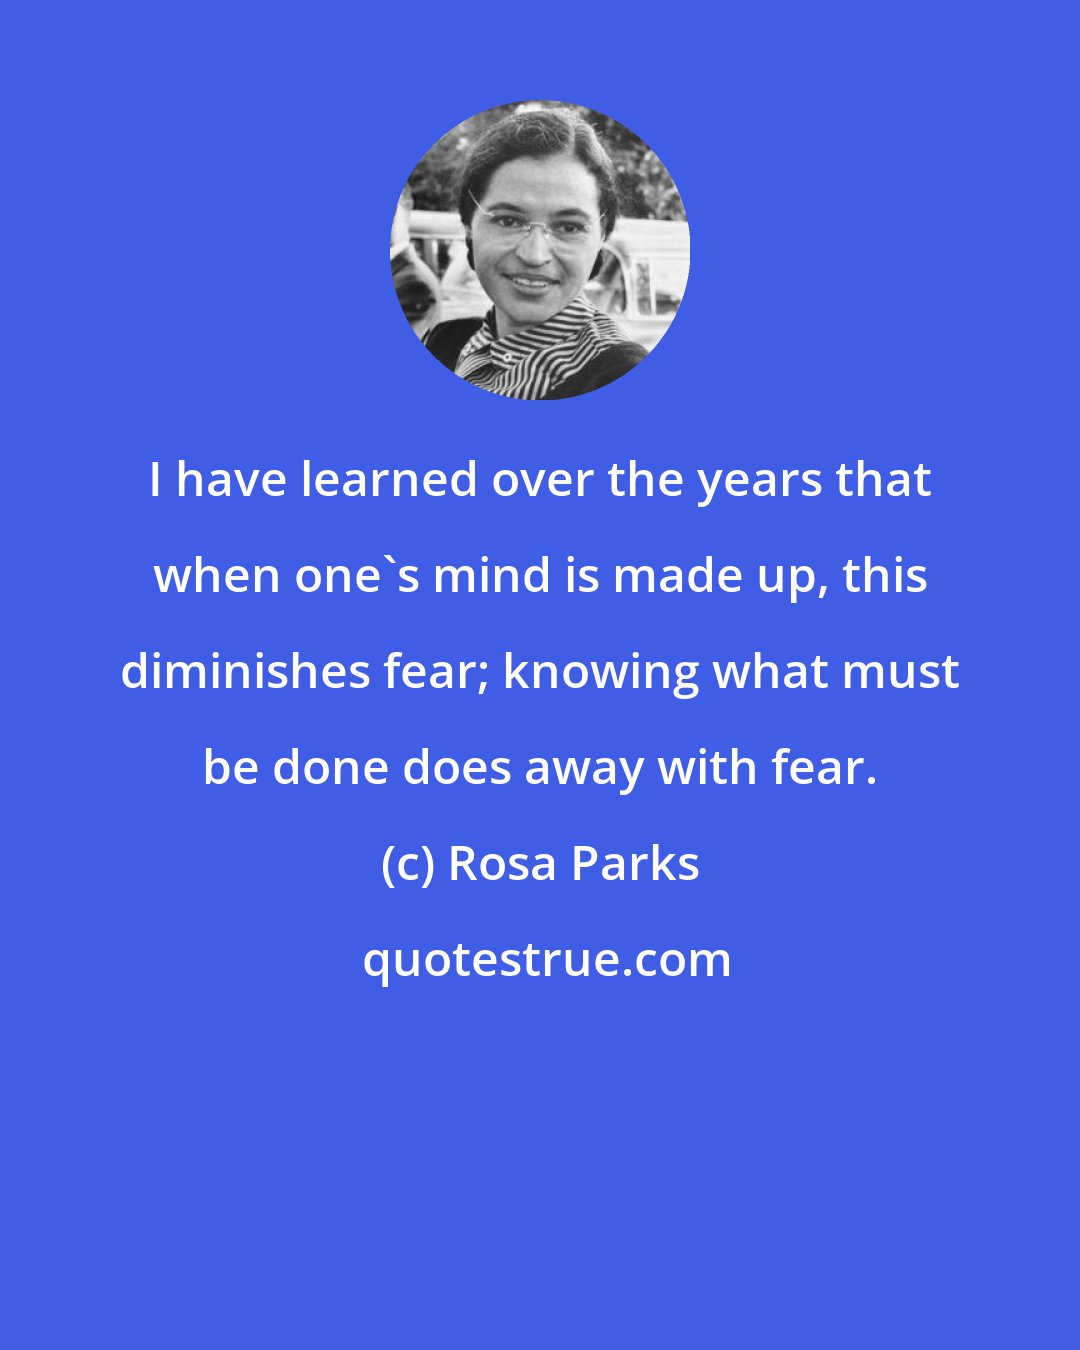 Rosa Parks: I have learned over the years that when one's mind is made up, this diminishes fear; knowing what must be done does away with fear.